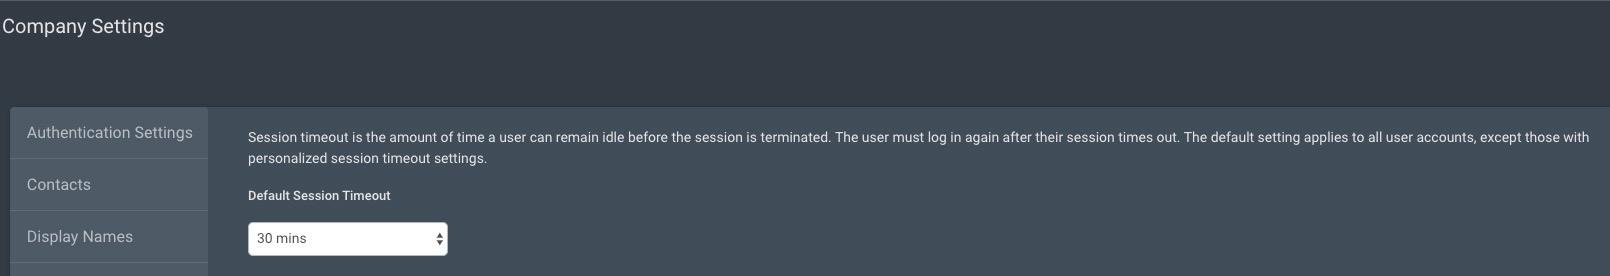 The Default Session Timeout setting on the Company Settings page